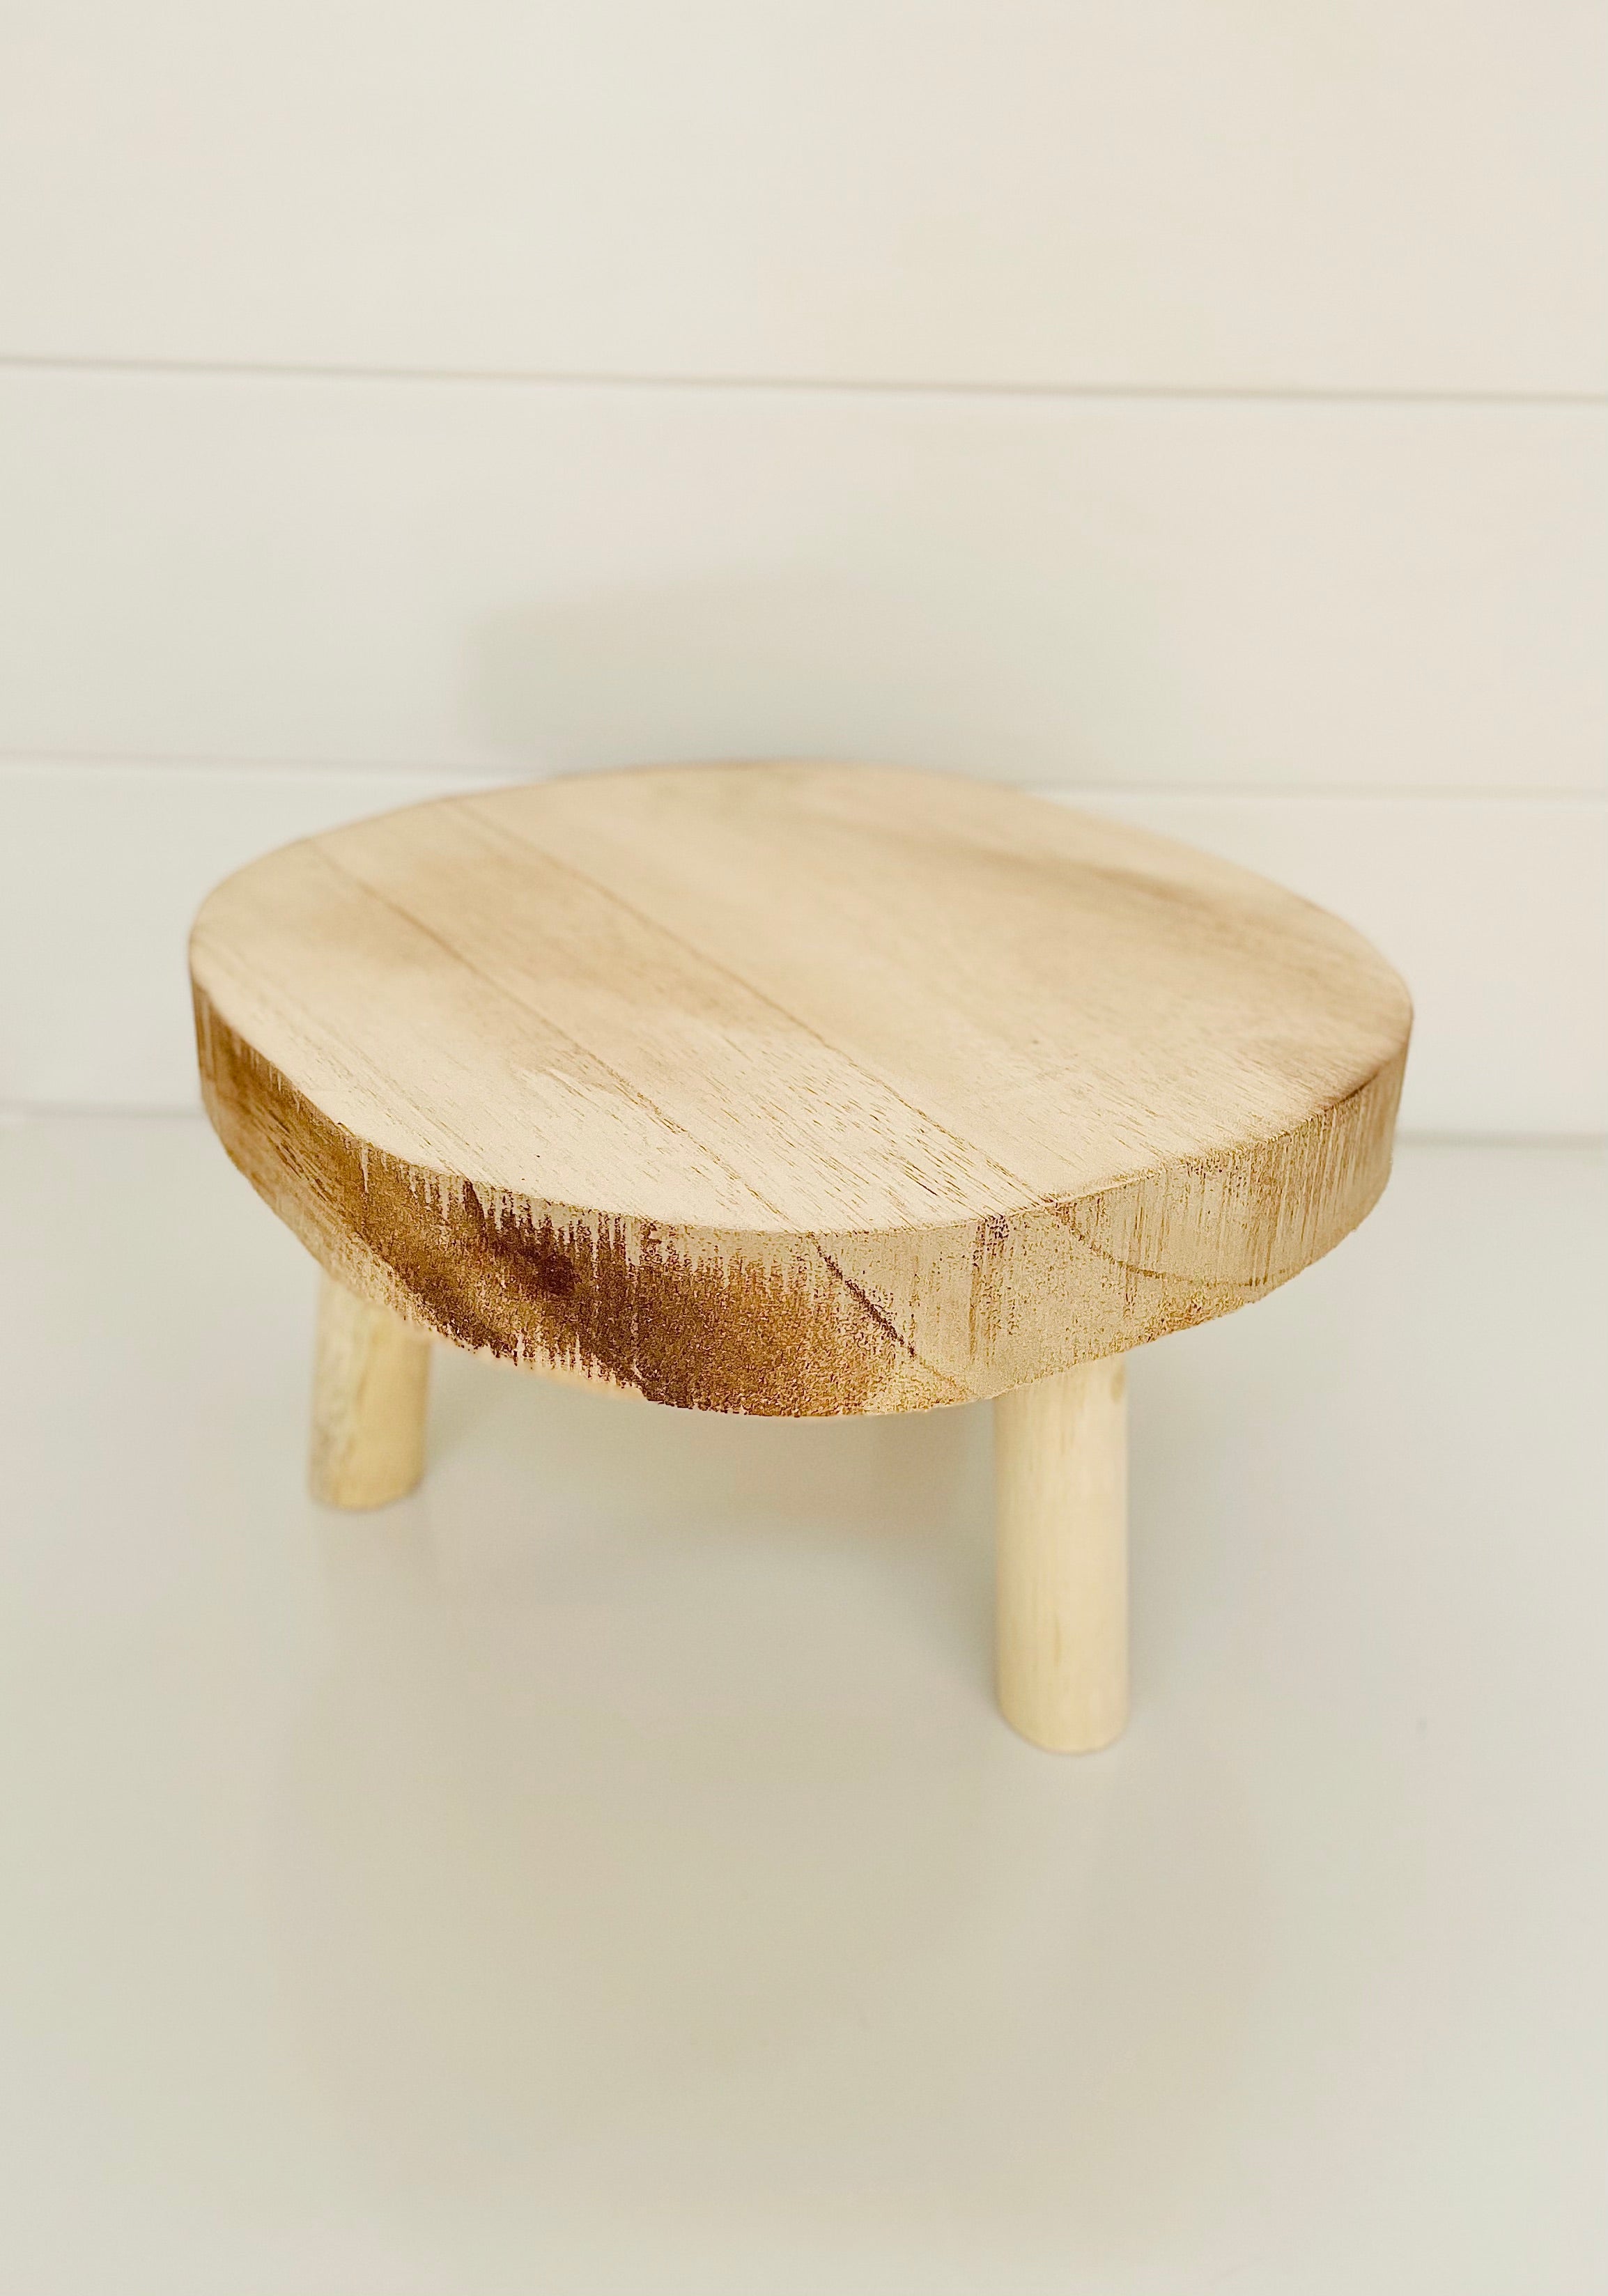 The Sawtell Wooden plant stand